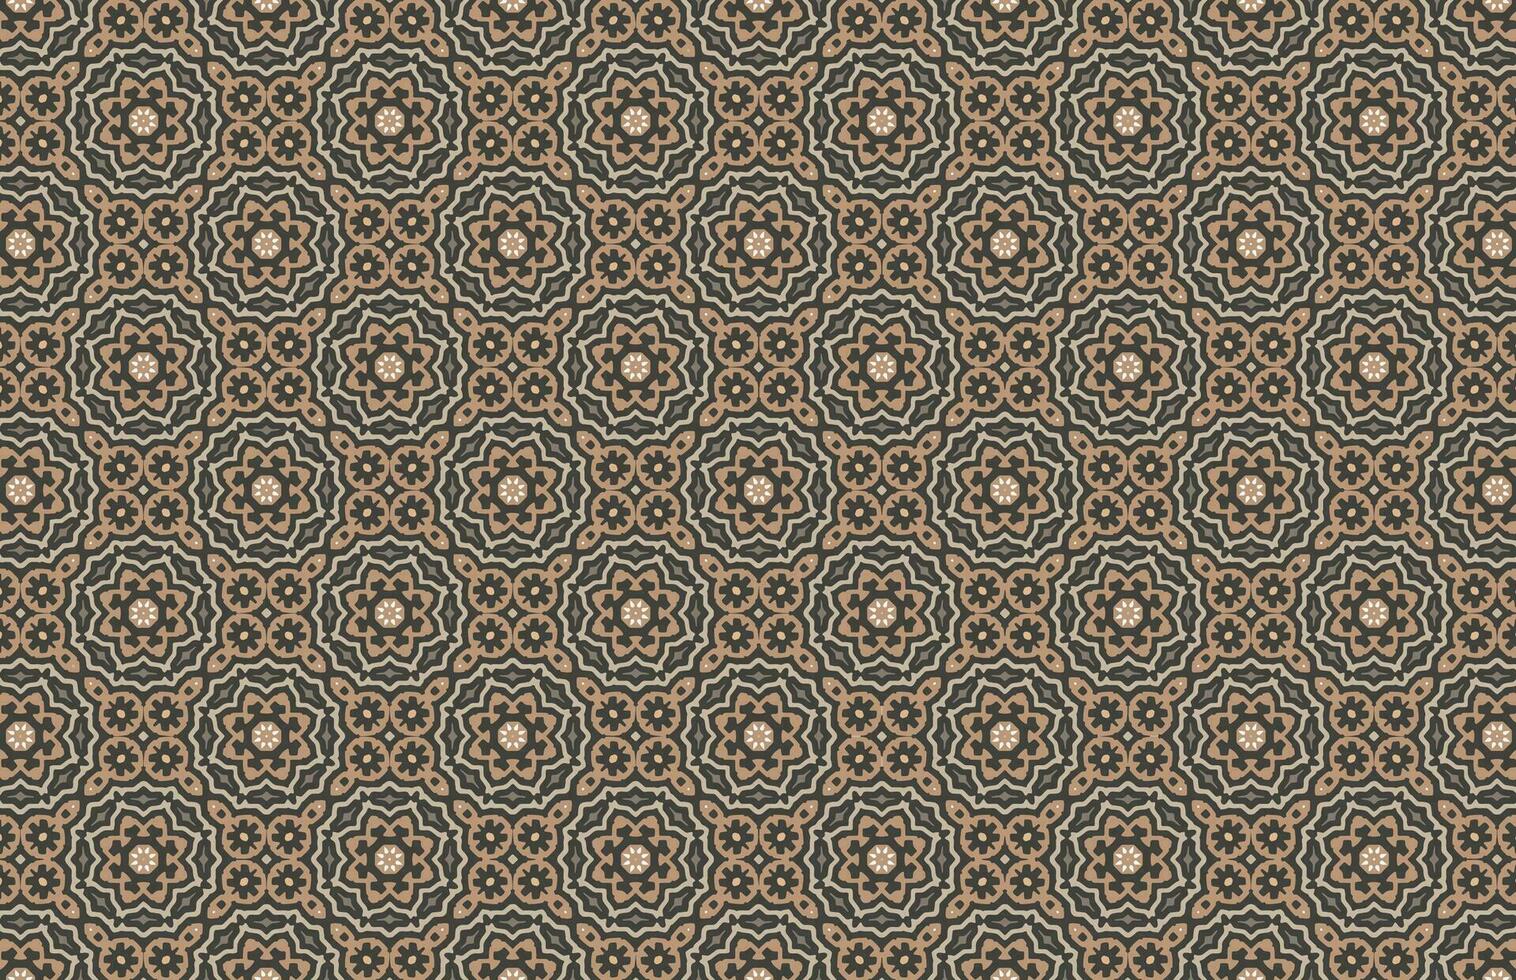 Moroccan colorful traditional fabric design pattern vector